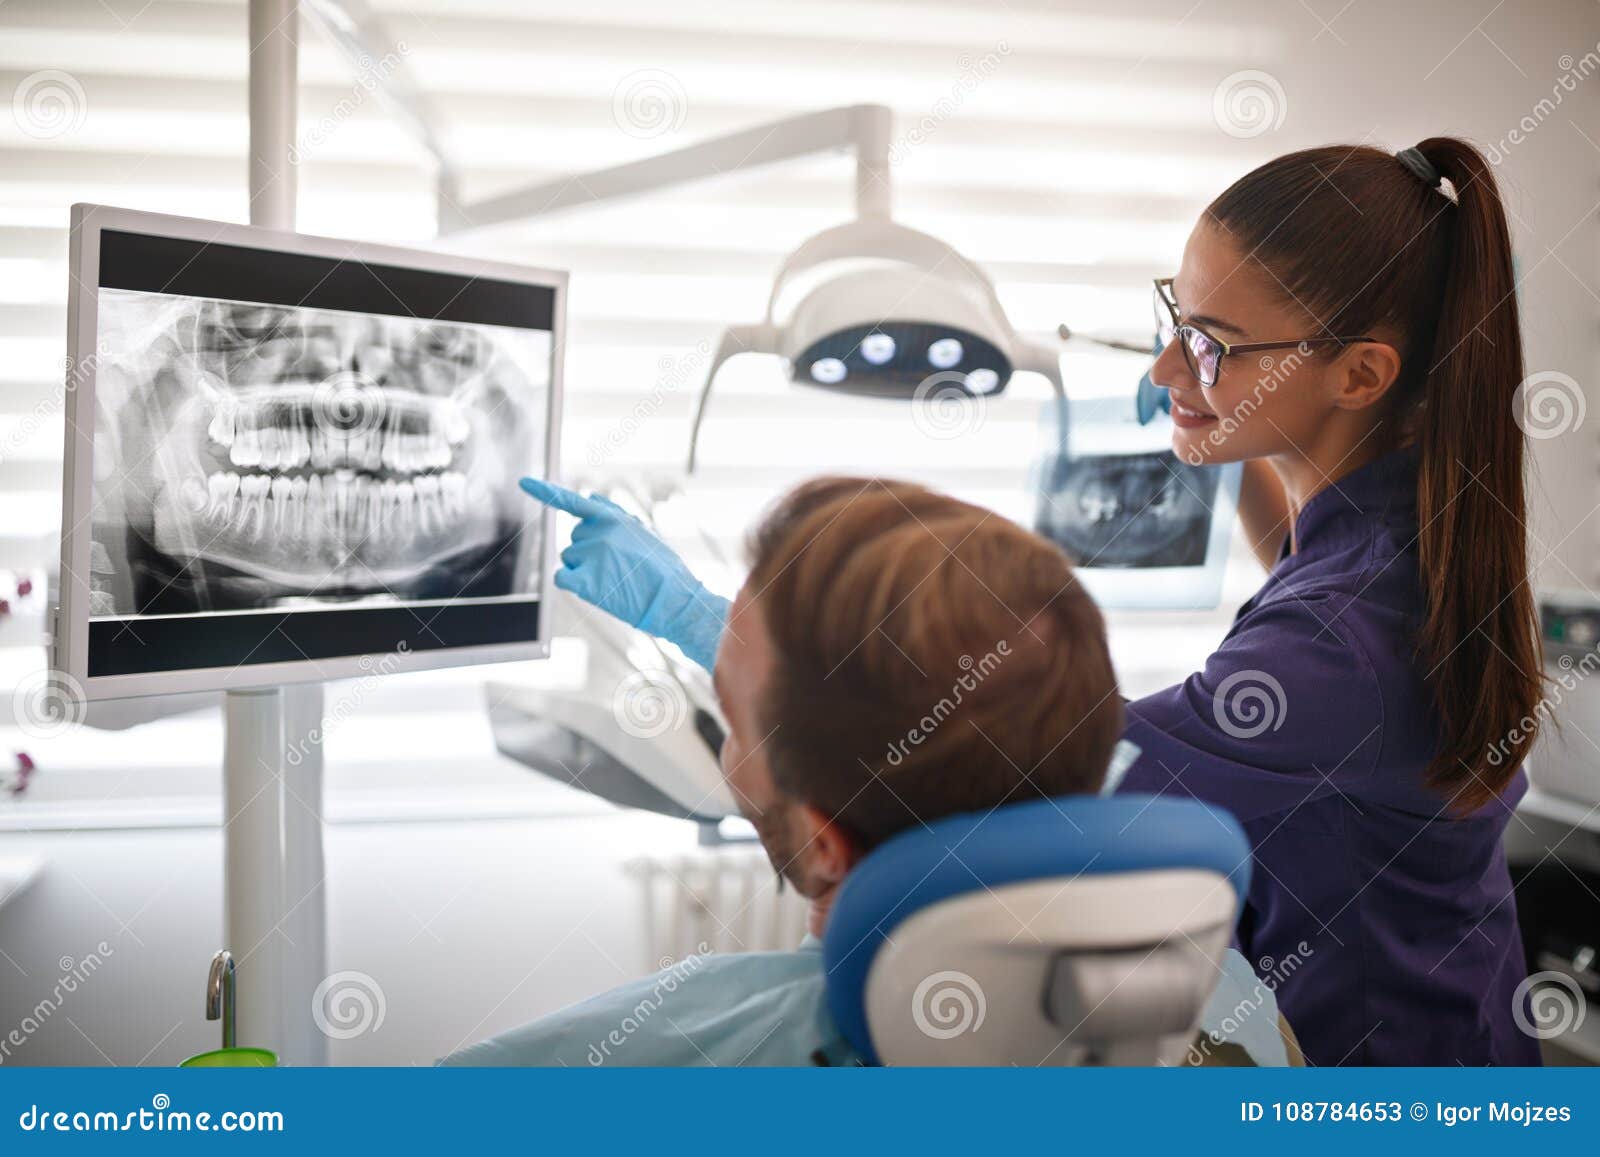 dentist showing x-ray footage of teeth to patient